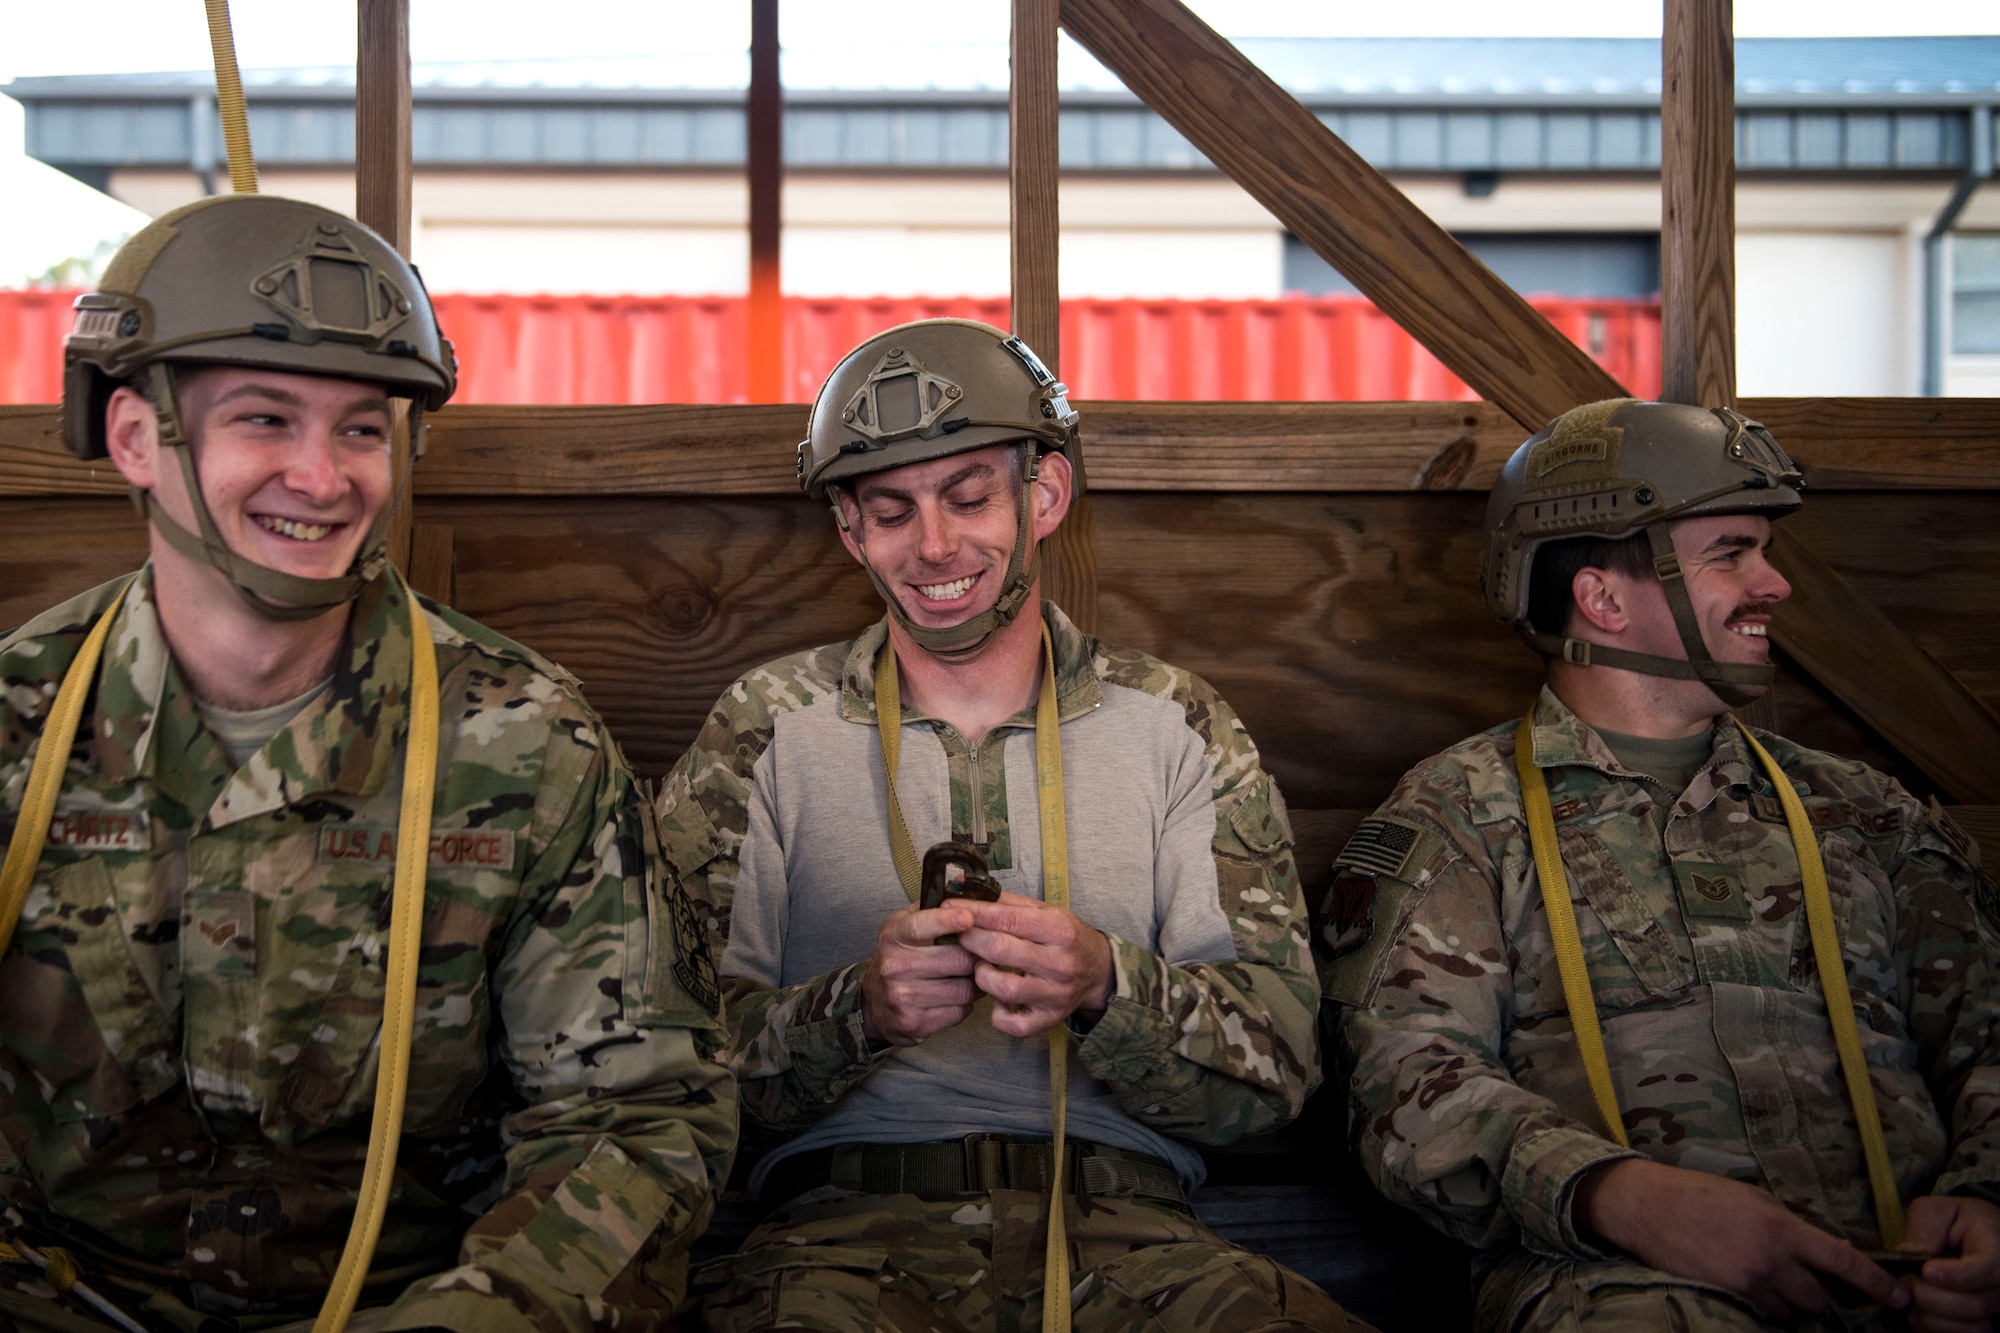 Airmen from the 93d Air Ground Operations Wing share a laugh during static-line jump training, Nov. 21, 2018, at Moody Air Force Base, Ga. The overall objective of the training was to increase jumpers’ skills, knowledge and proficiency in regards to airborne operations. During a static-line jump, the jumper is attached to the aircraft via the ‘static-line’, which automatically deploys the jumpers’ parachute after they’ve exited the aircraft. (U.S. Air Force photo by Airman 1st Class Erick Requadt)